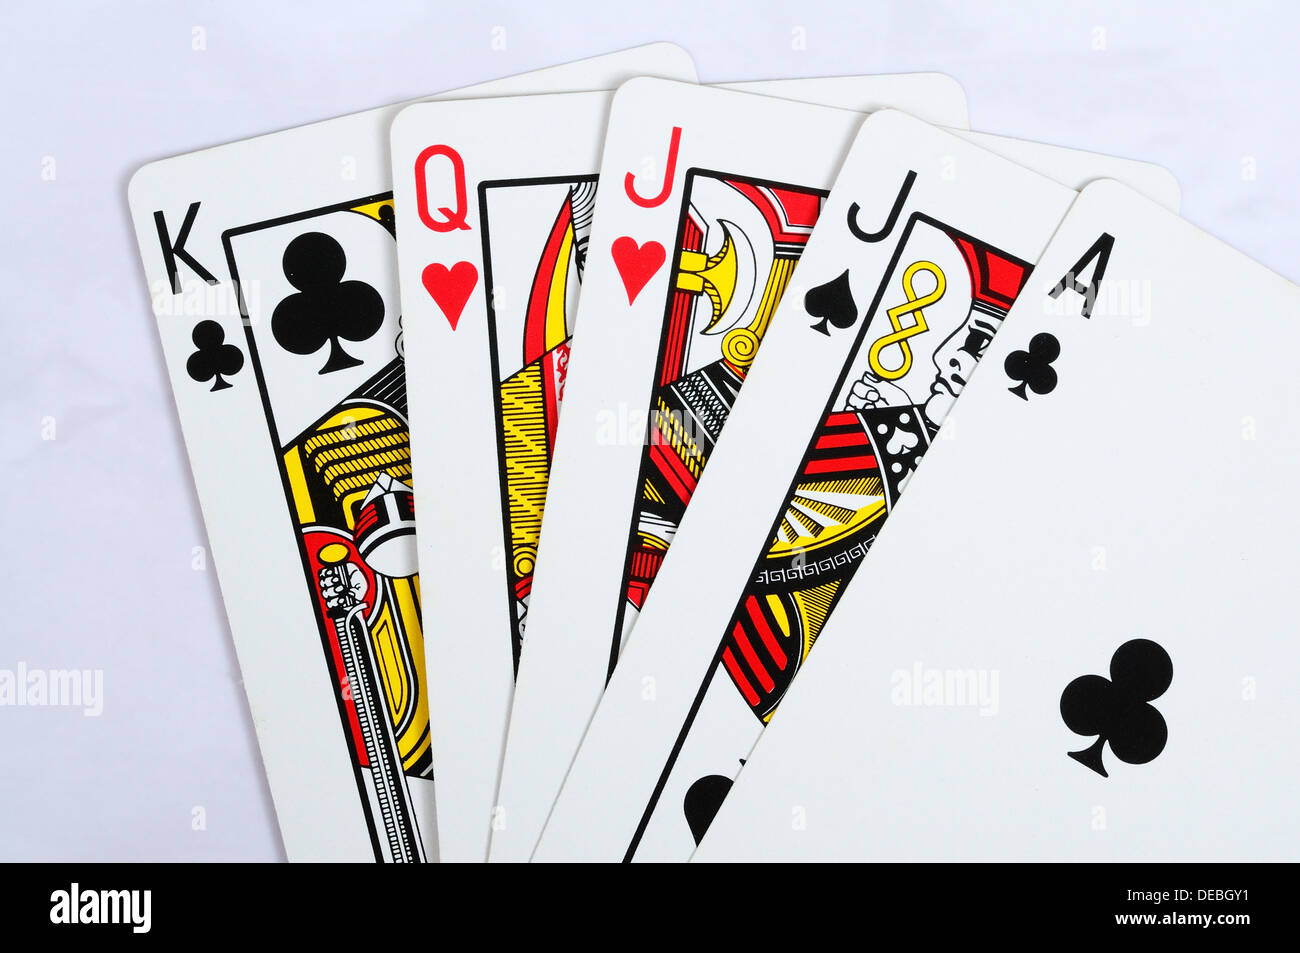 Figure characters. King, queen and jack of spades. Playing cards. Stock  Illustration by ©filkusto #102359416